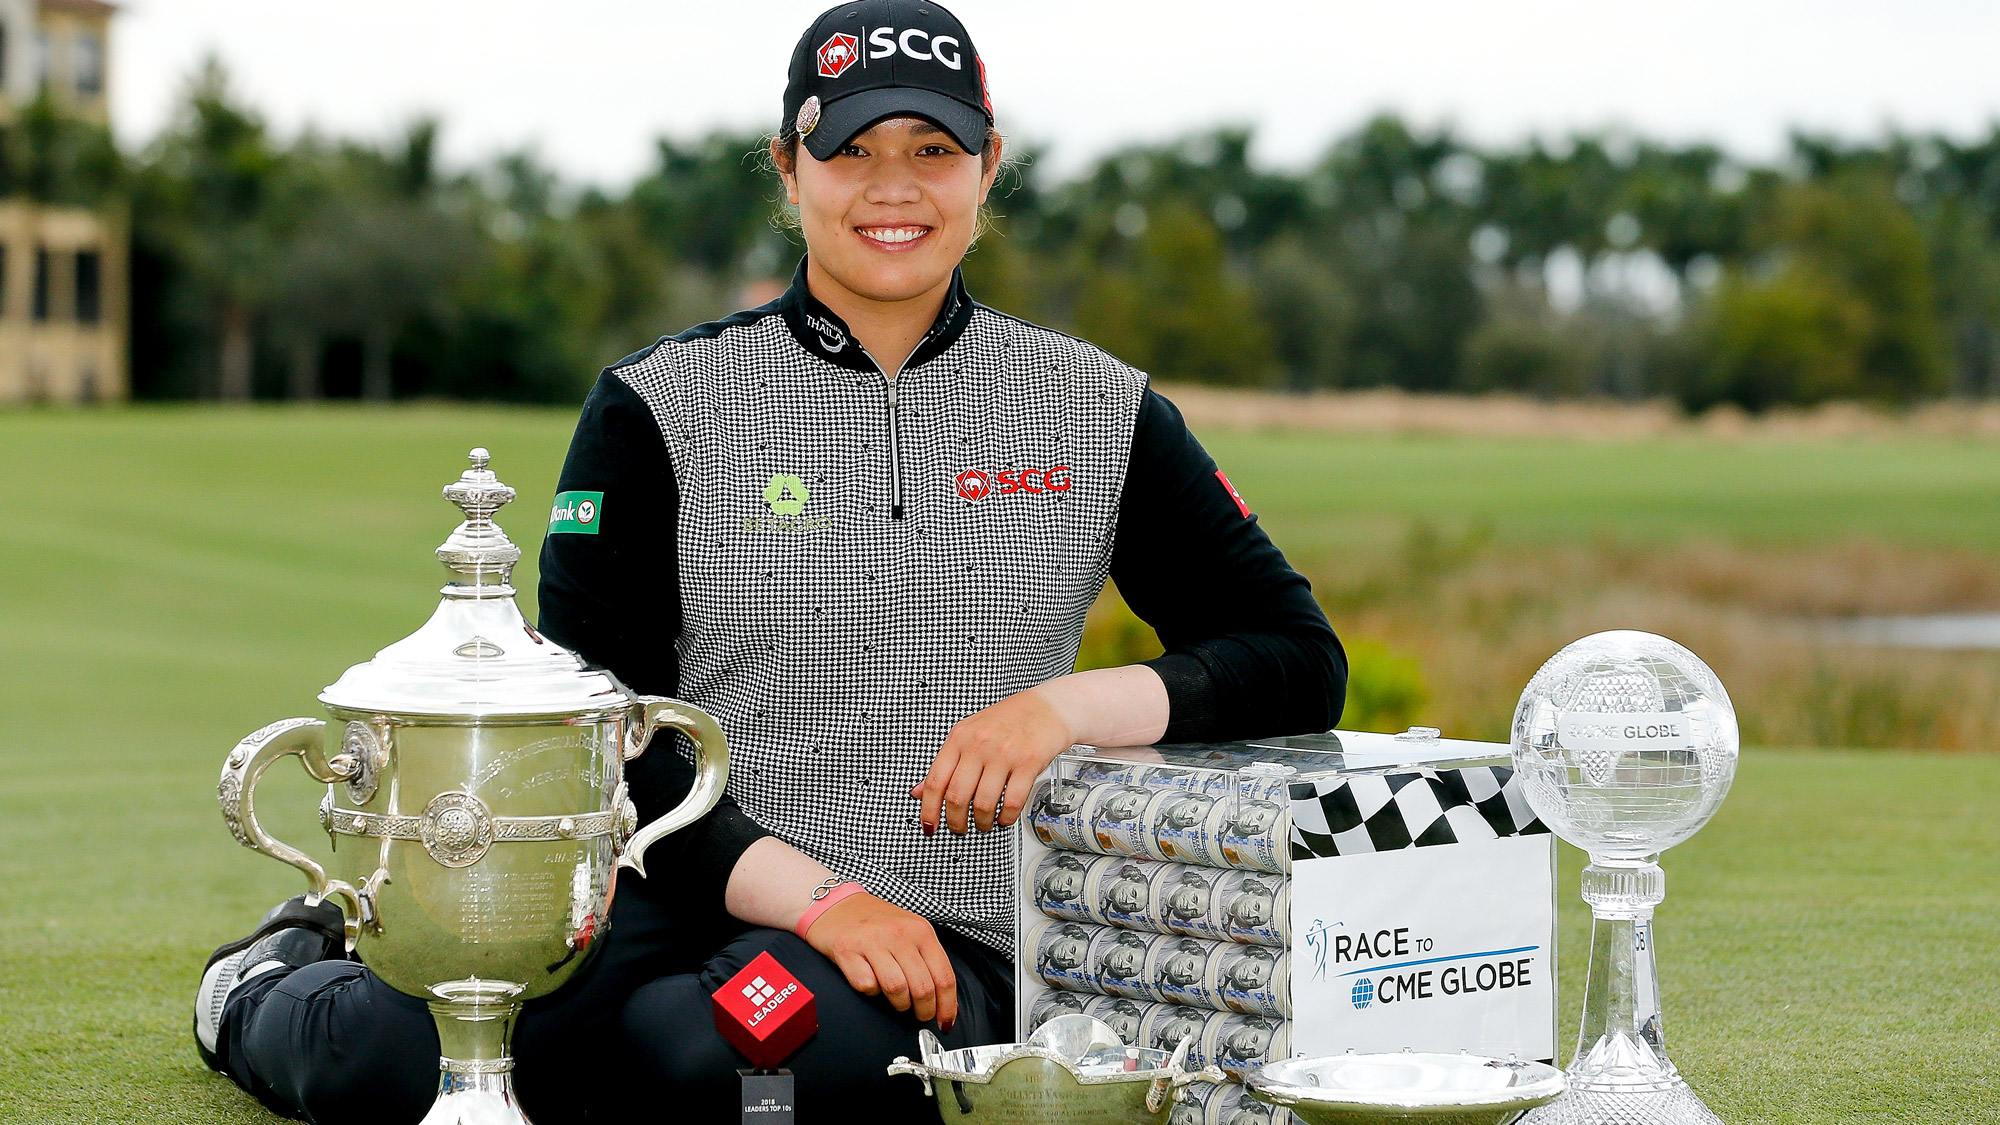 Ariya Jutanugarn of Thailand poses for a photo with (left to right) the Rolex Player of the Year trophy, Leaders Top 10 Competition Trophy, Vare trophy, Rolex Annika Major award and the Race to the CME Globe trophy after the final round of the LPGA CME Group Tour Championship